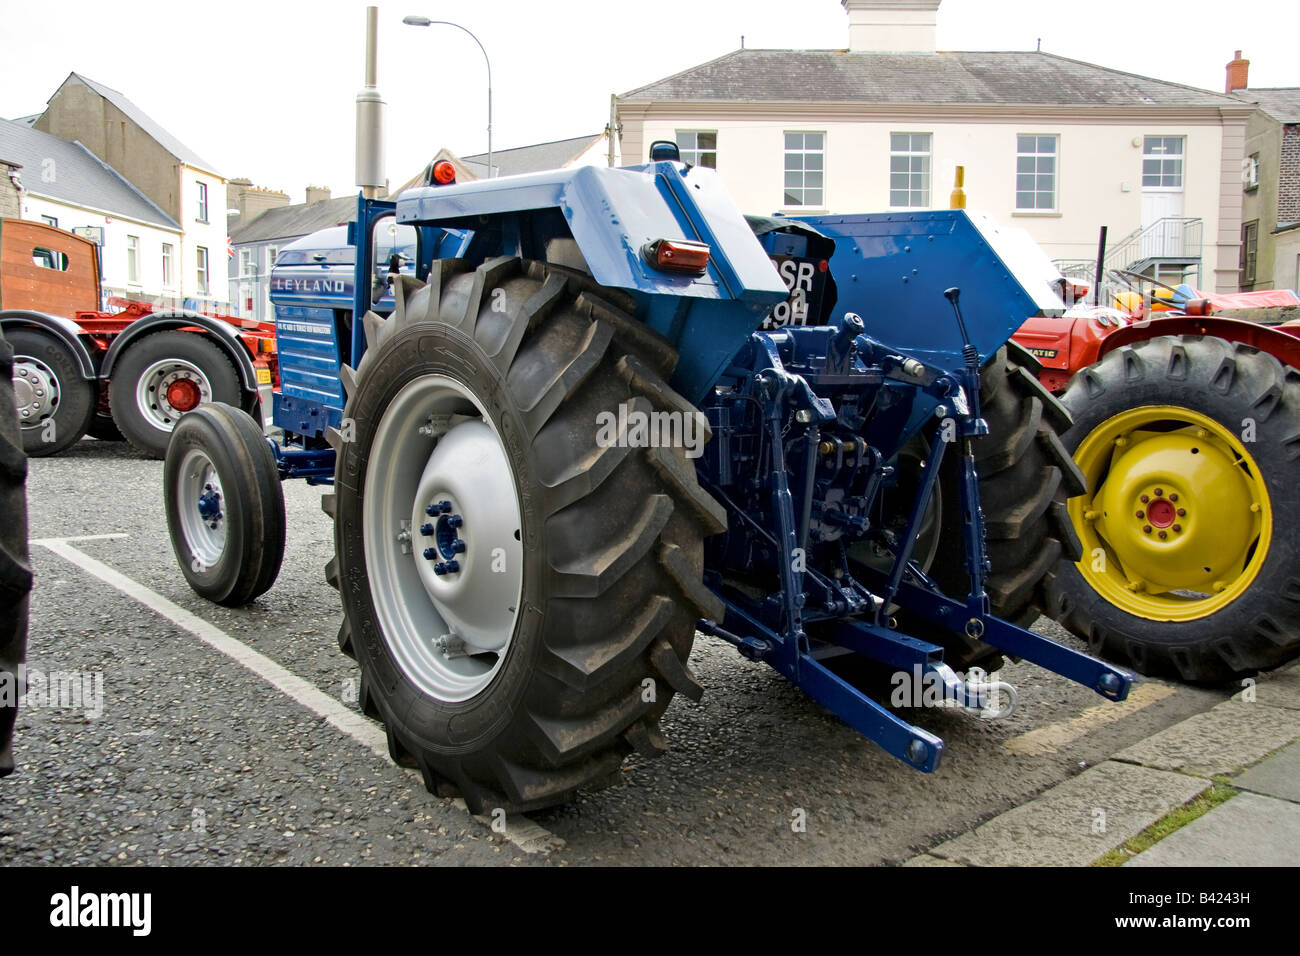 an well maintained old leyland tractor sits among other old tractors Stock Photo